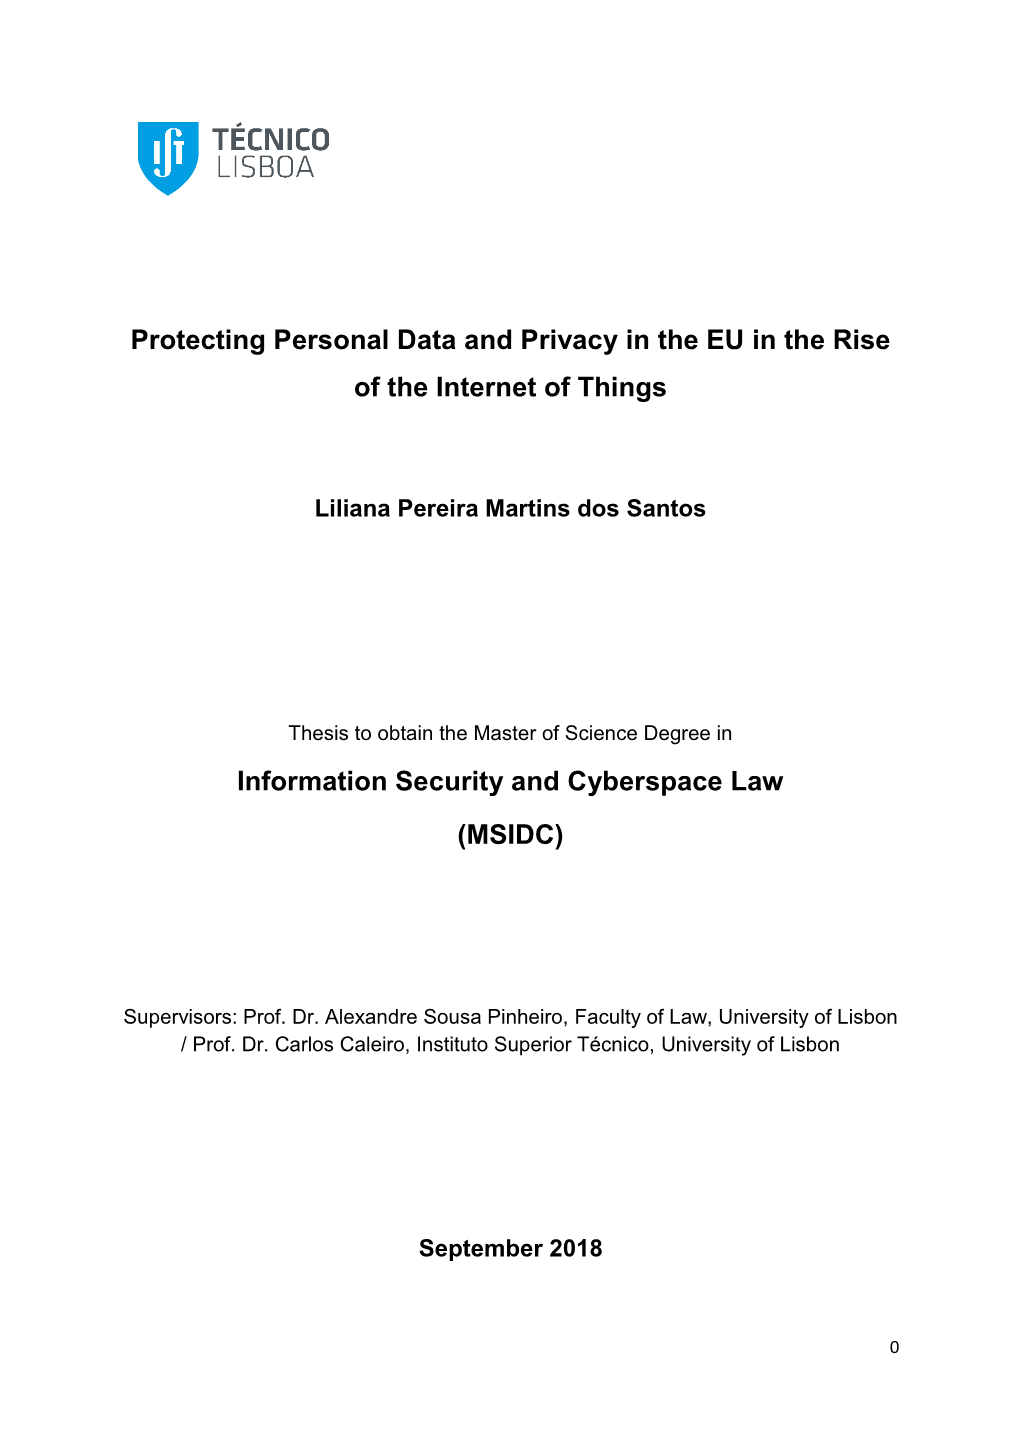 Protecting Personal Data and Privacy in the EU in the Rise of the Internet of Things